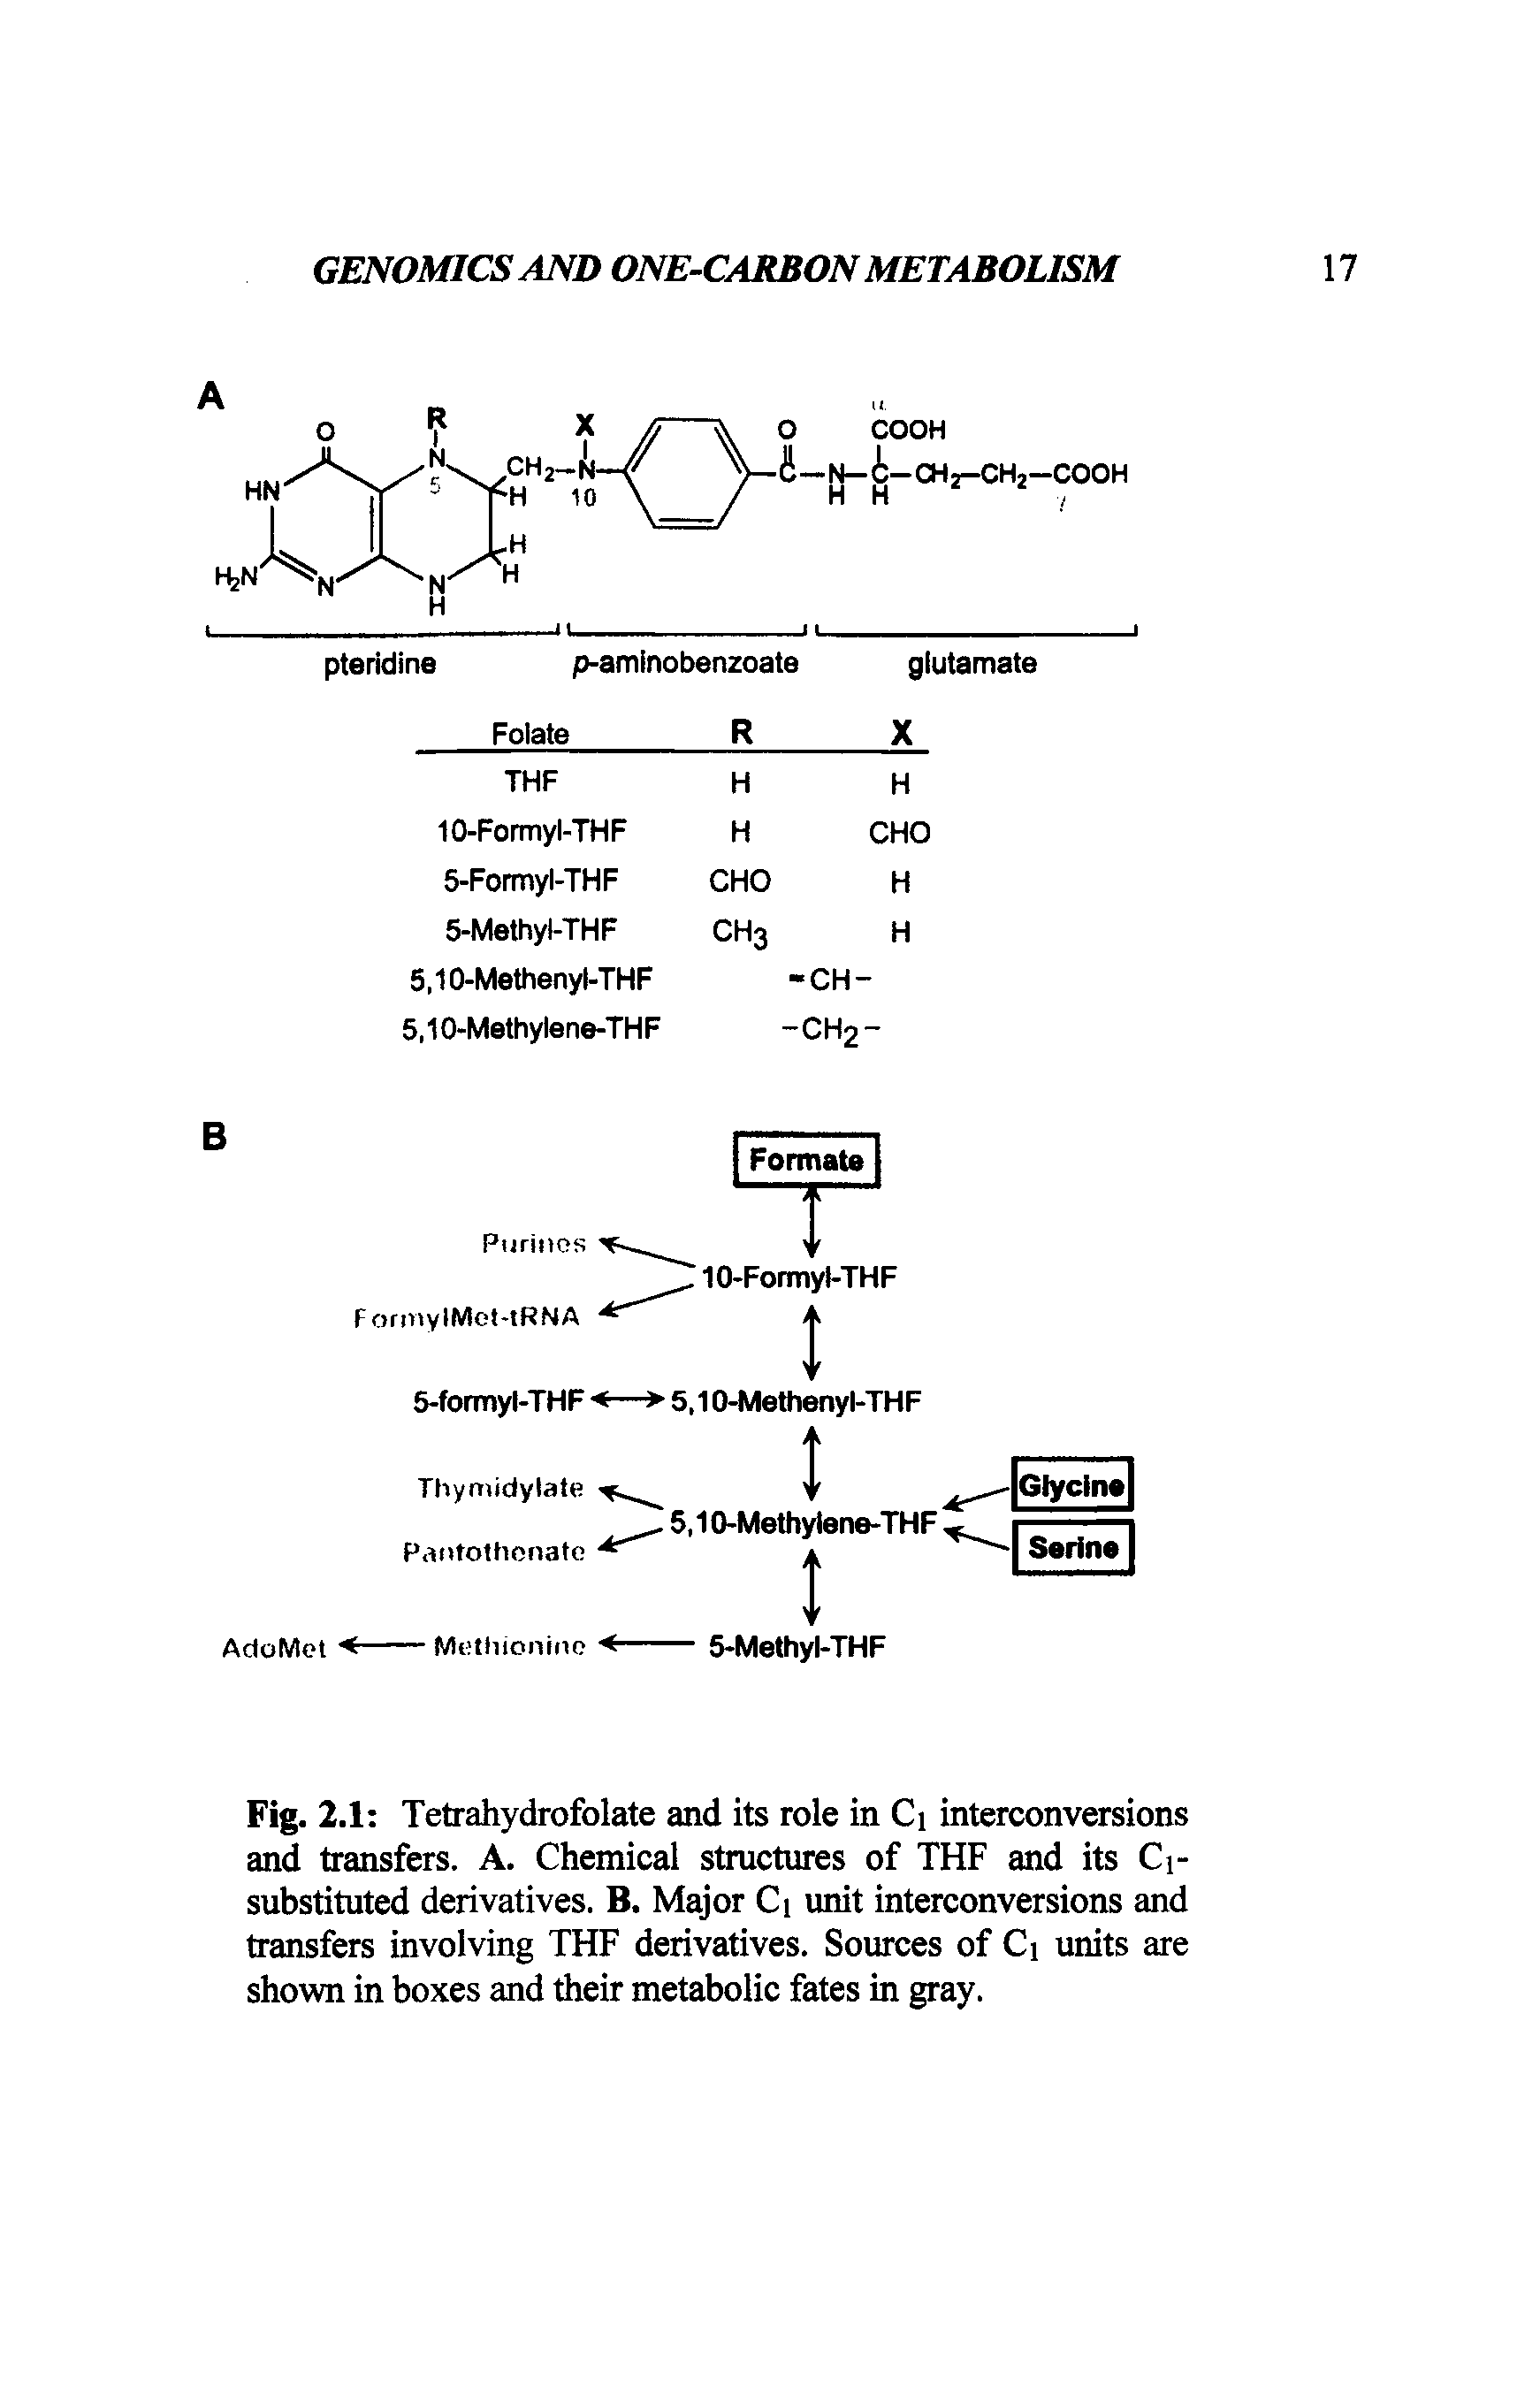 Fig. 2.1 Tetrahydrofolate and its role in Ci interconversions and transfers. A. Chemical structures of THF and its Ci-substituted derivatives. B. Major Ci unit interconversions and transfers involving THF derivatives. Sources of Ci units are shown in boxes and their metabolic fates in gray.